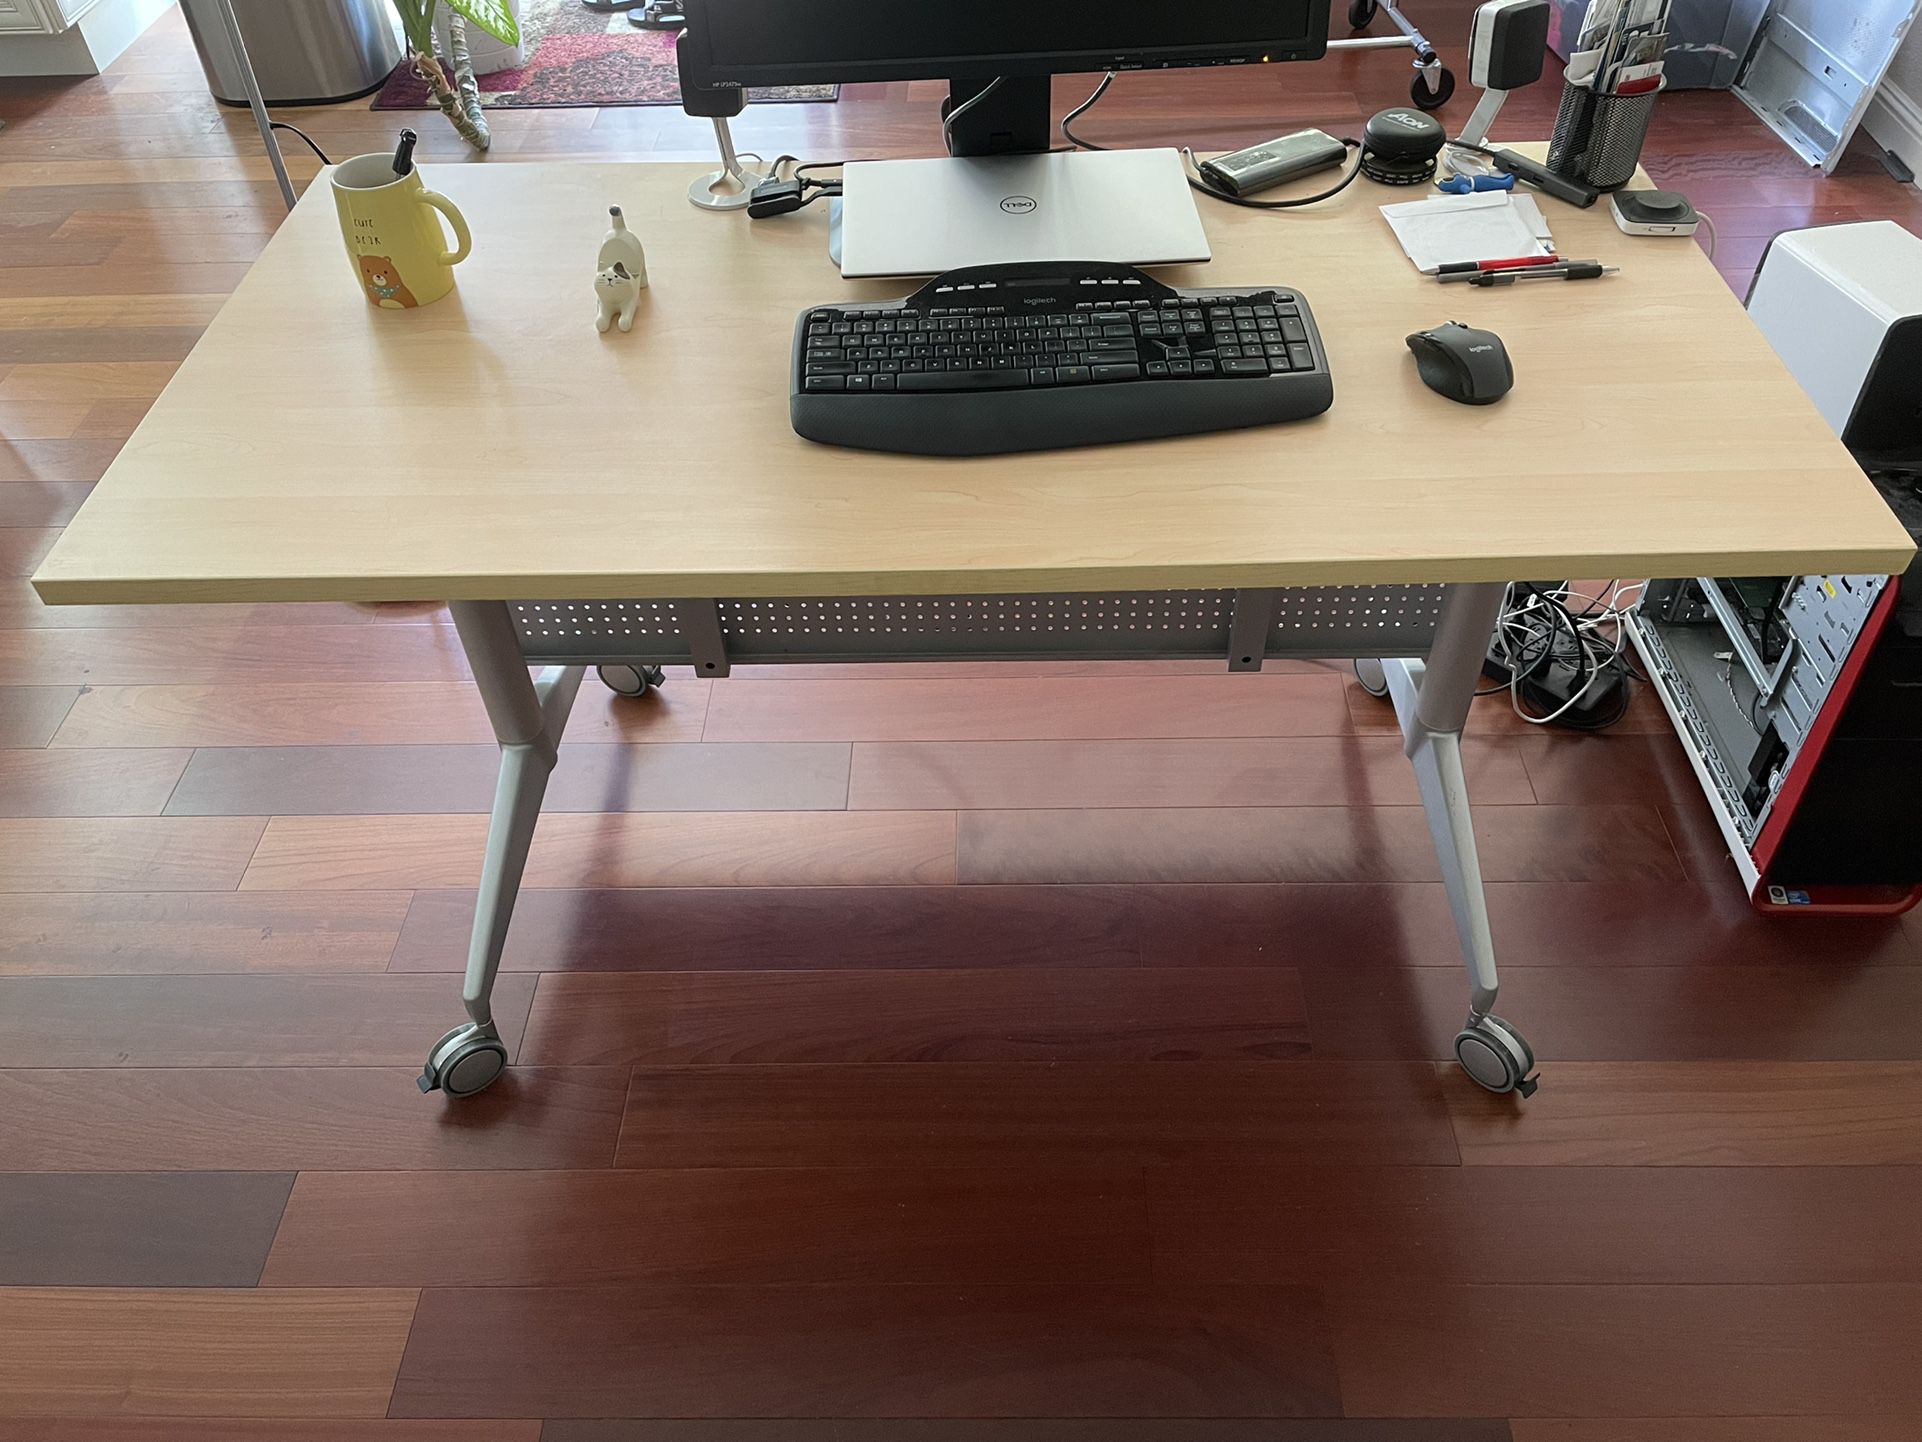 New High Quality Scandinavian Design Office Desk in perfect condition 55w * 28D * 29.5 H